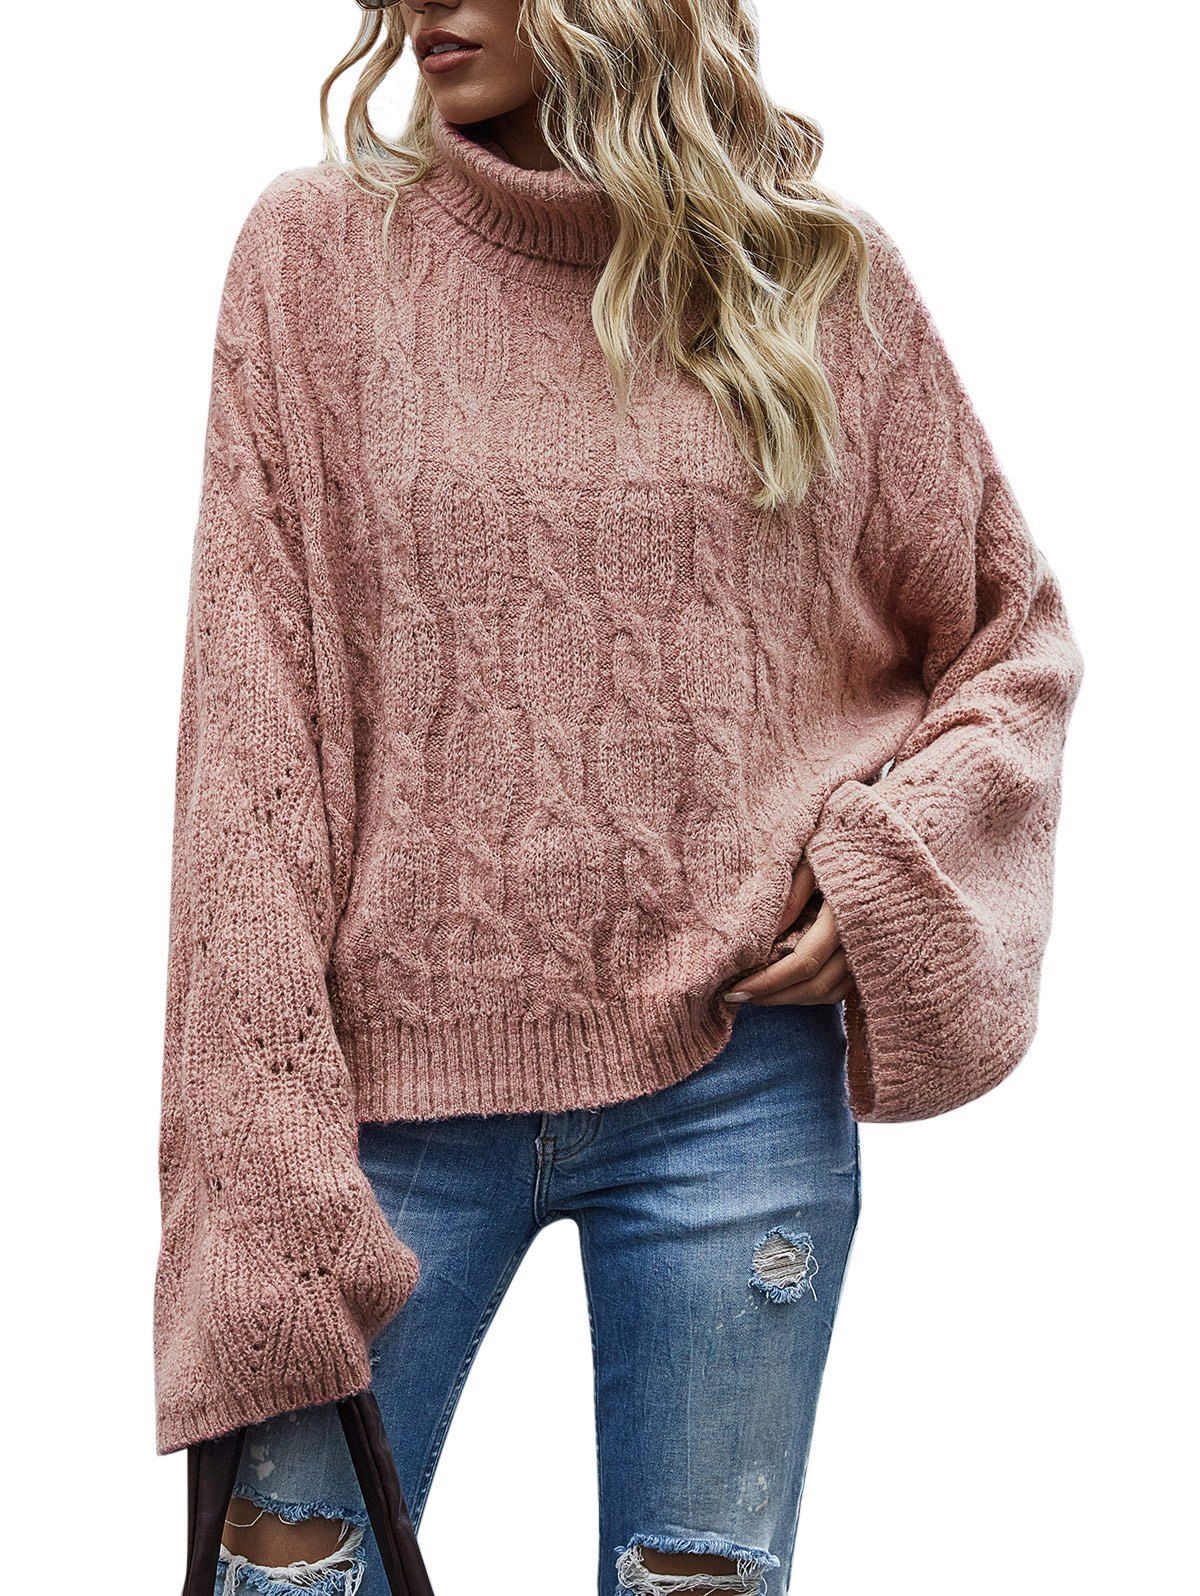 Turtleneck Cable Knit Pointelle Knit Sweater - LIGHT PINK L